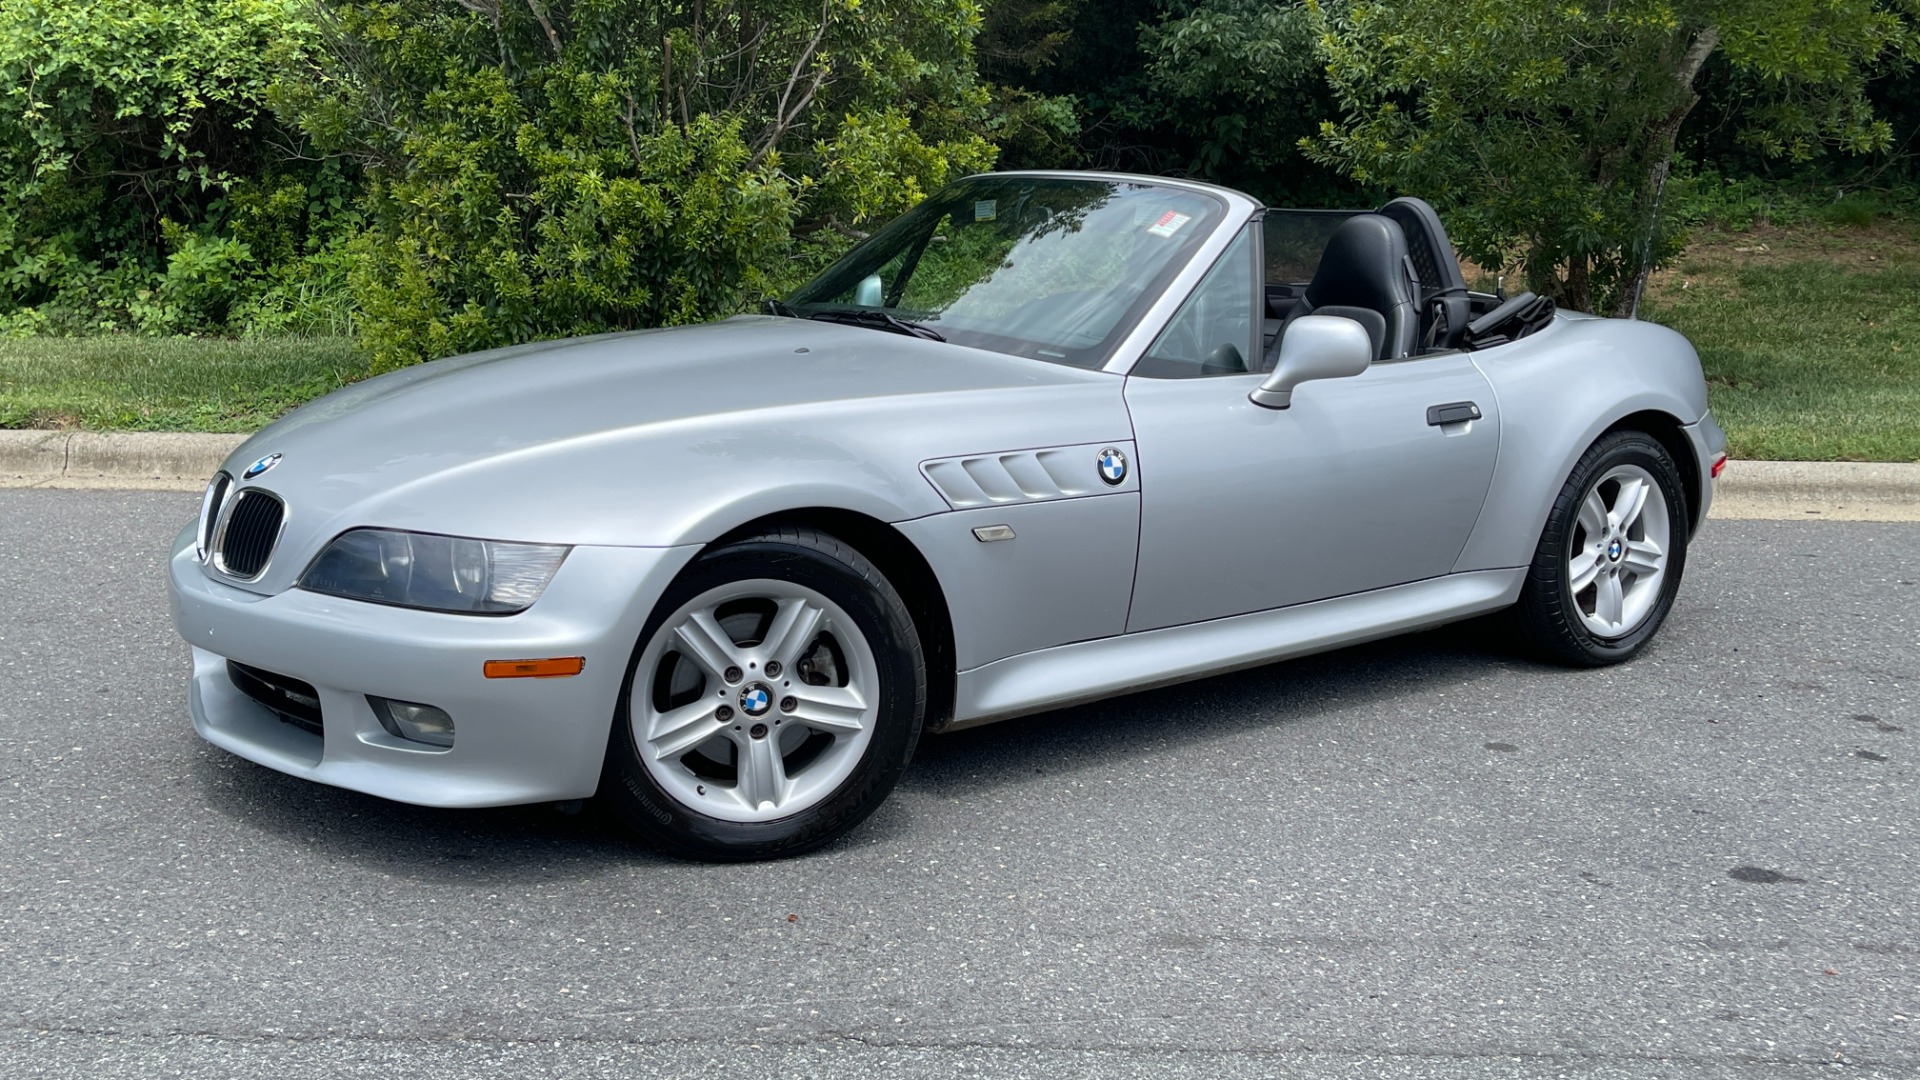 Stroomopwaarts Vaarwel spijsvertering Used 2000 BMW Z3 2.5L / CONVERTIBLE / PWR TOP / AUTOMATIC / HEATED SEATS /  LEATHER For Sale ($9,999) | Formula Imports Stock #FC12250